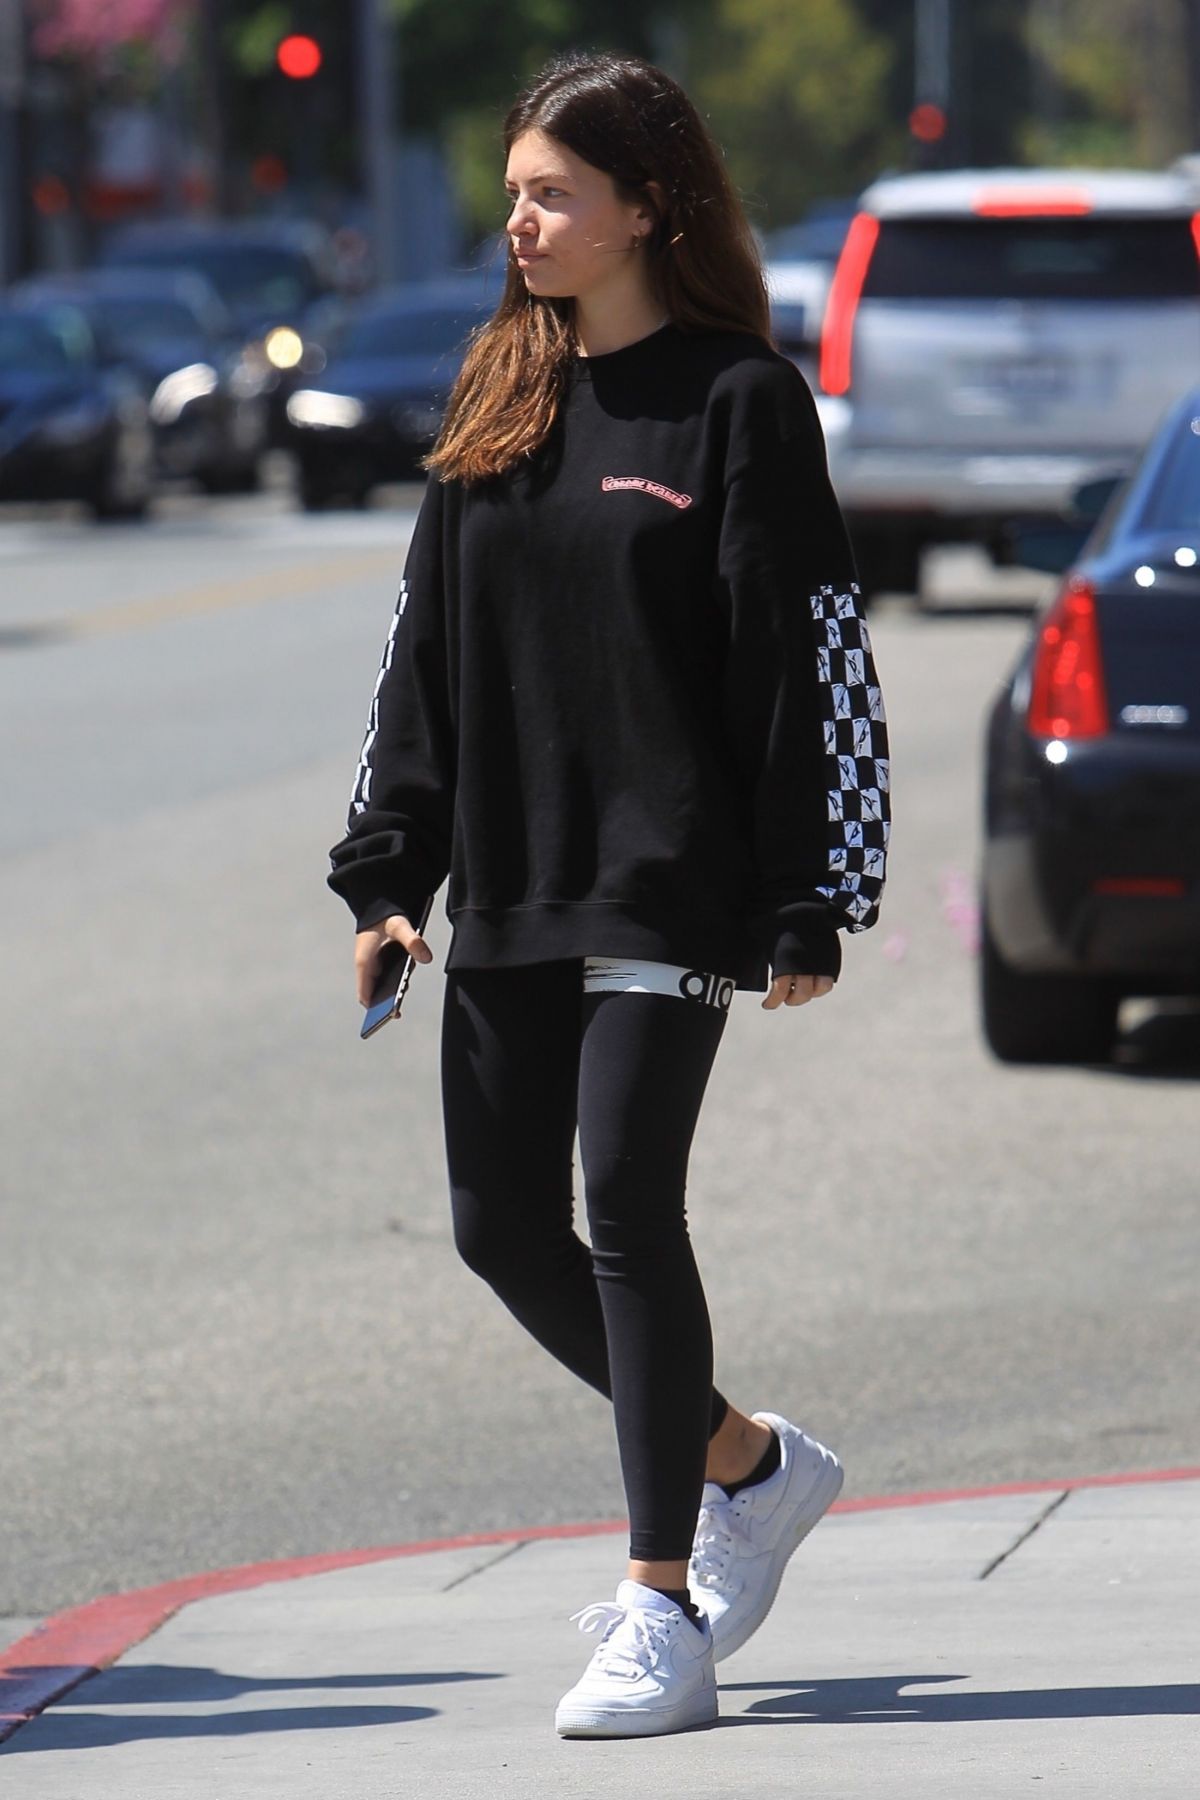 thylane-blondeau-out-for-lunch-in-beverly-hills-04-23-2019-4.jpg